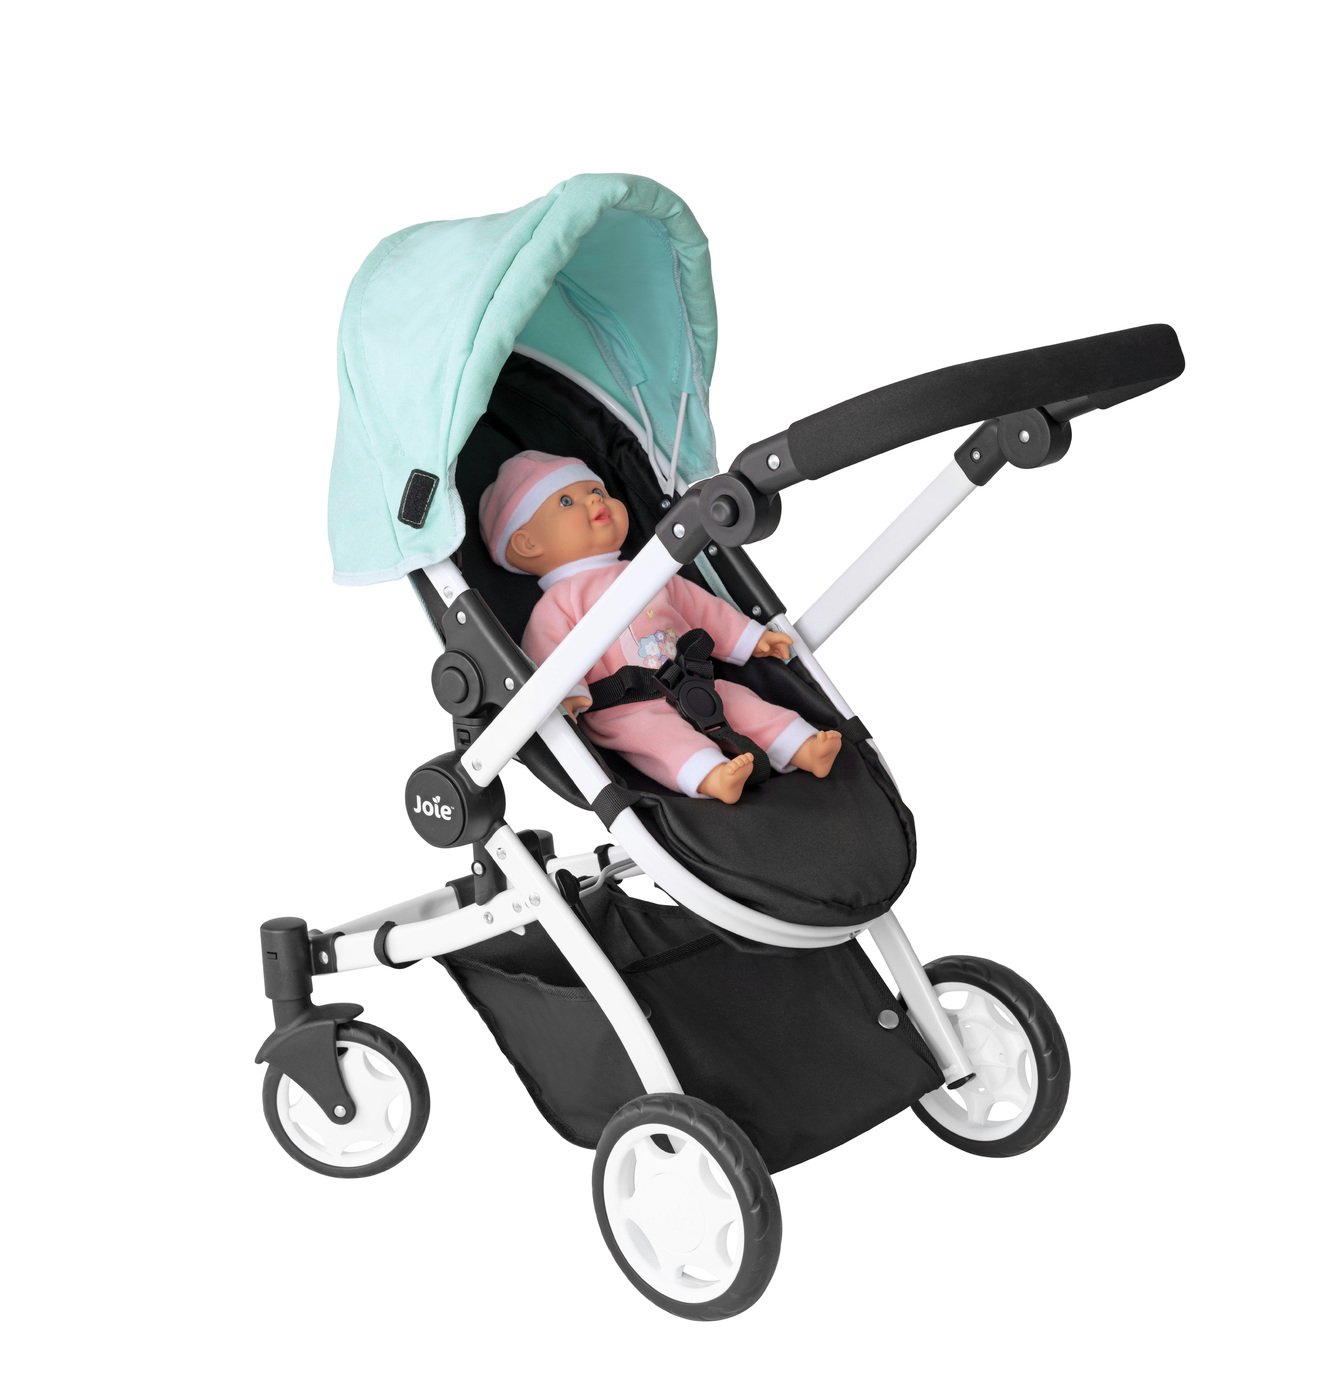 Joie Junior Chrome 3 In 1 Toy Pram Review